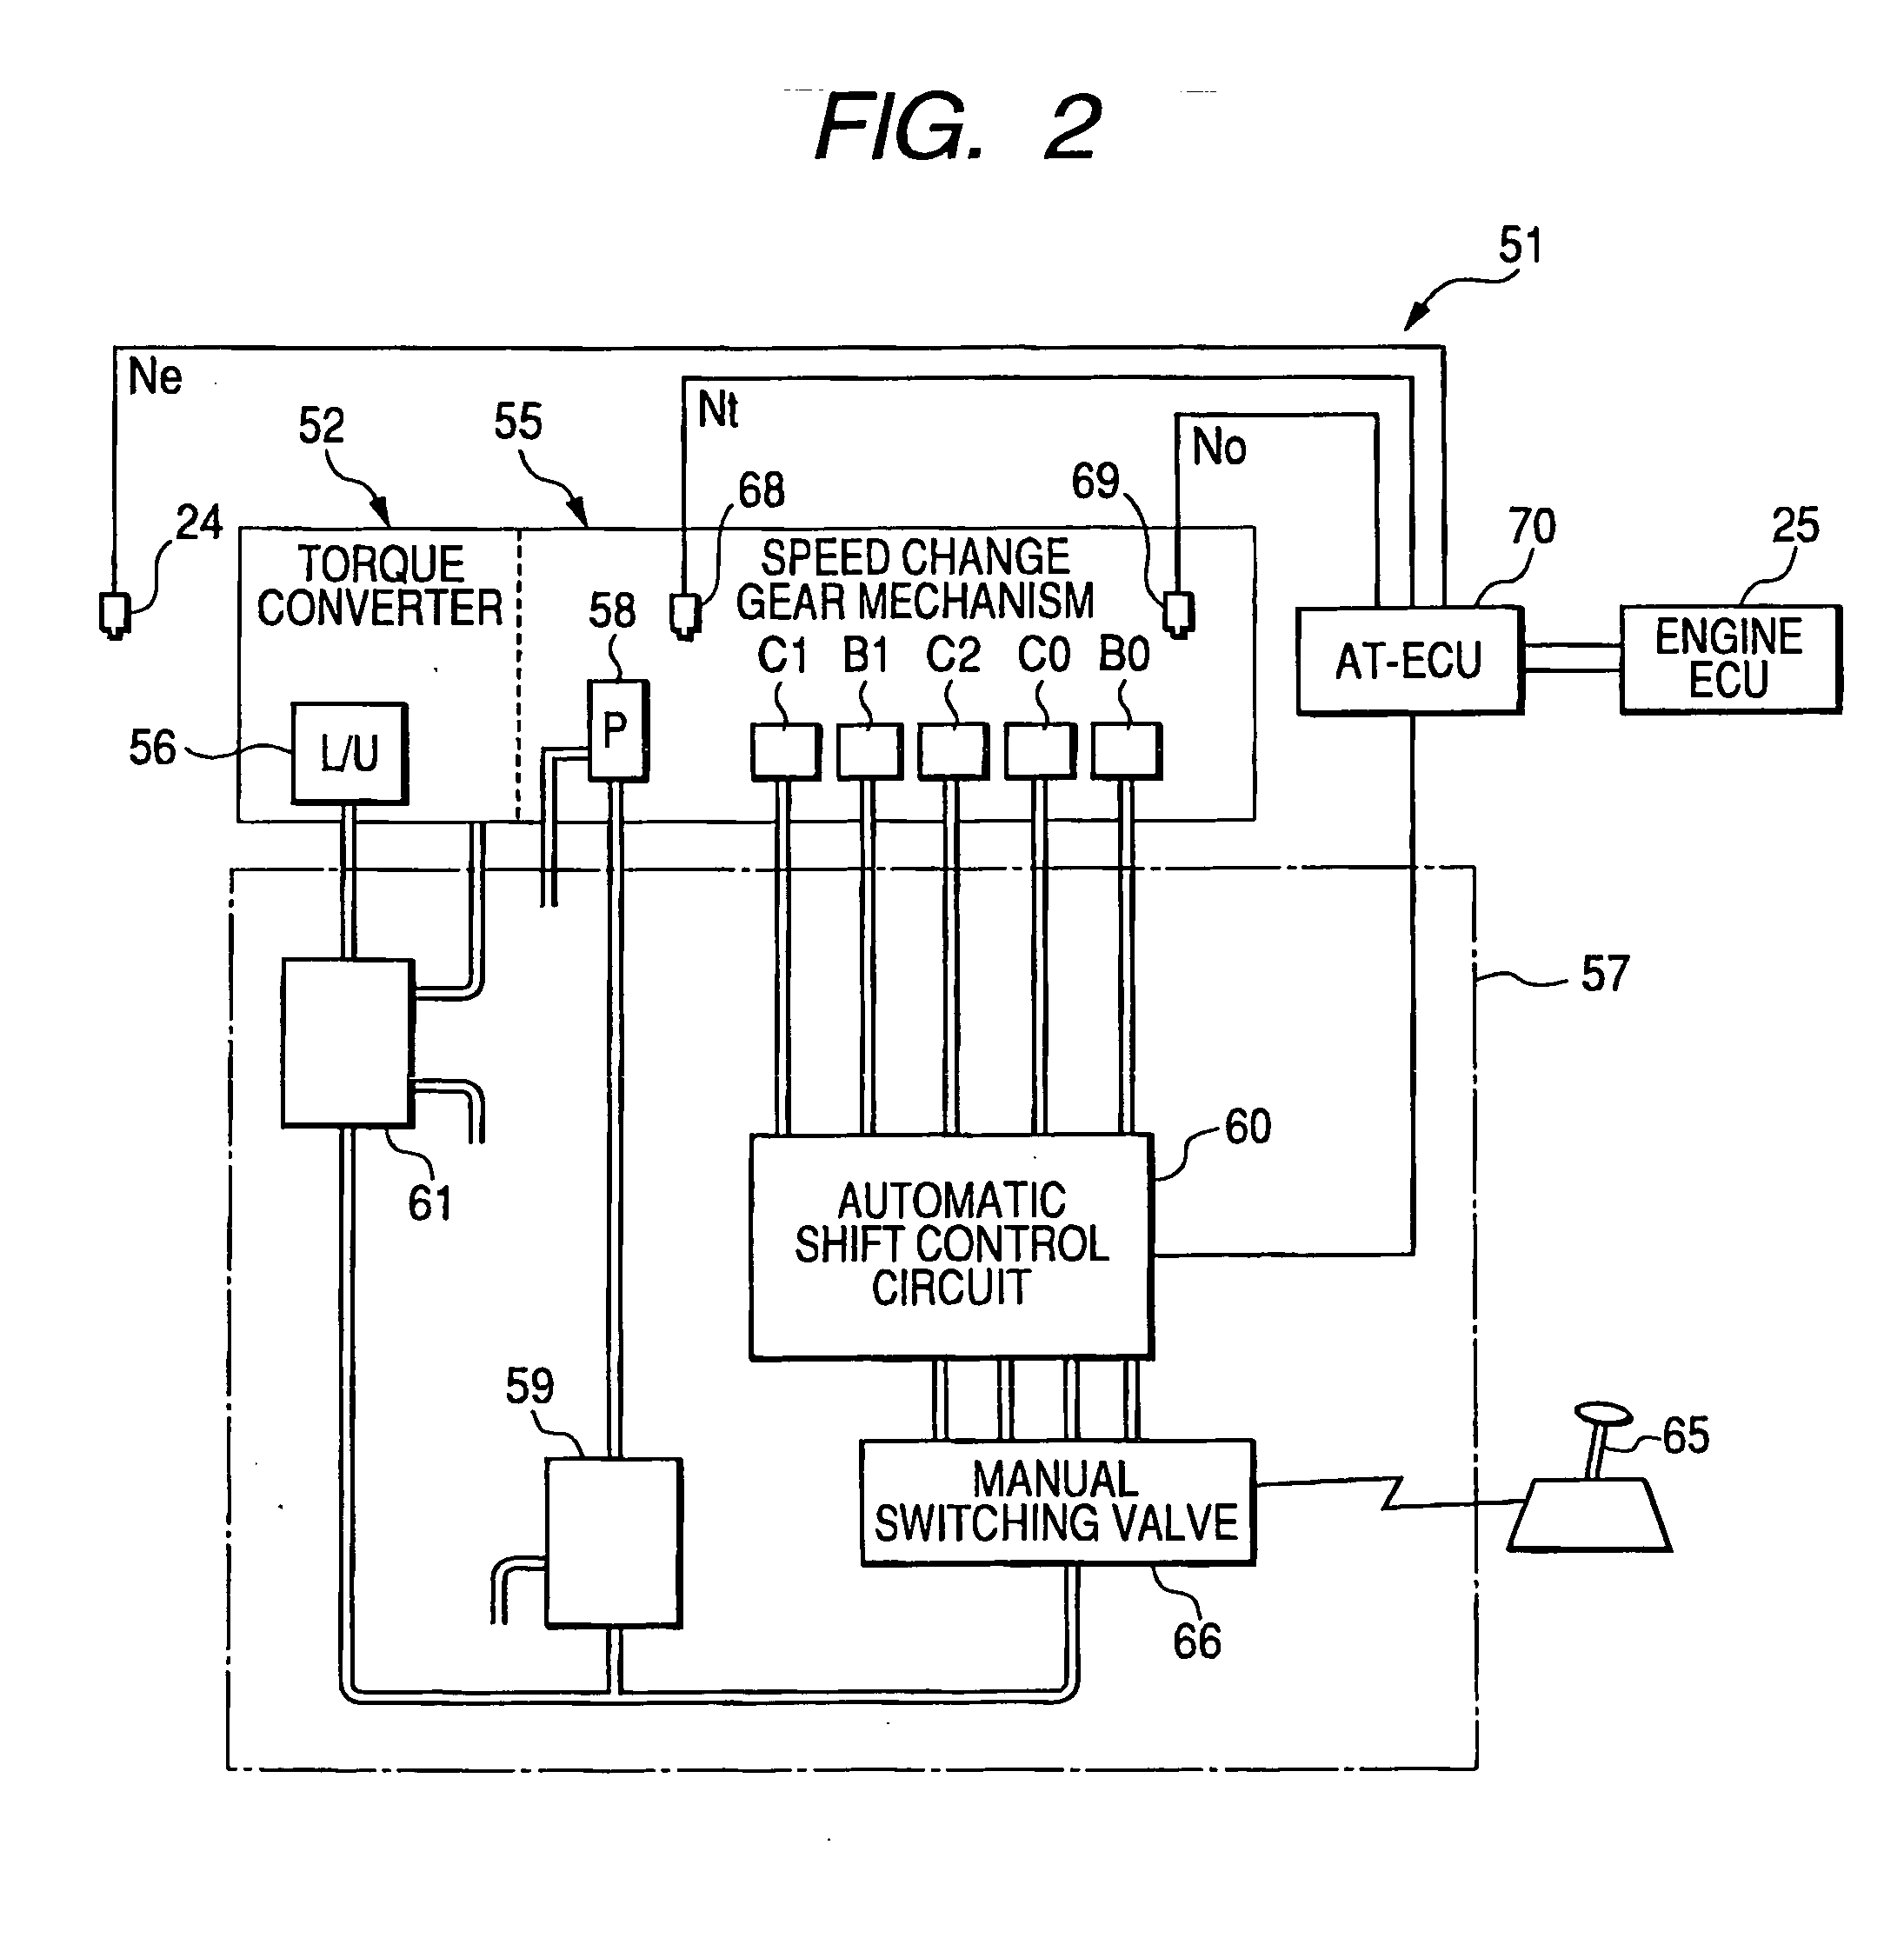 Control apparatus for an automatic transmission and related control method